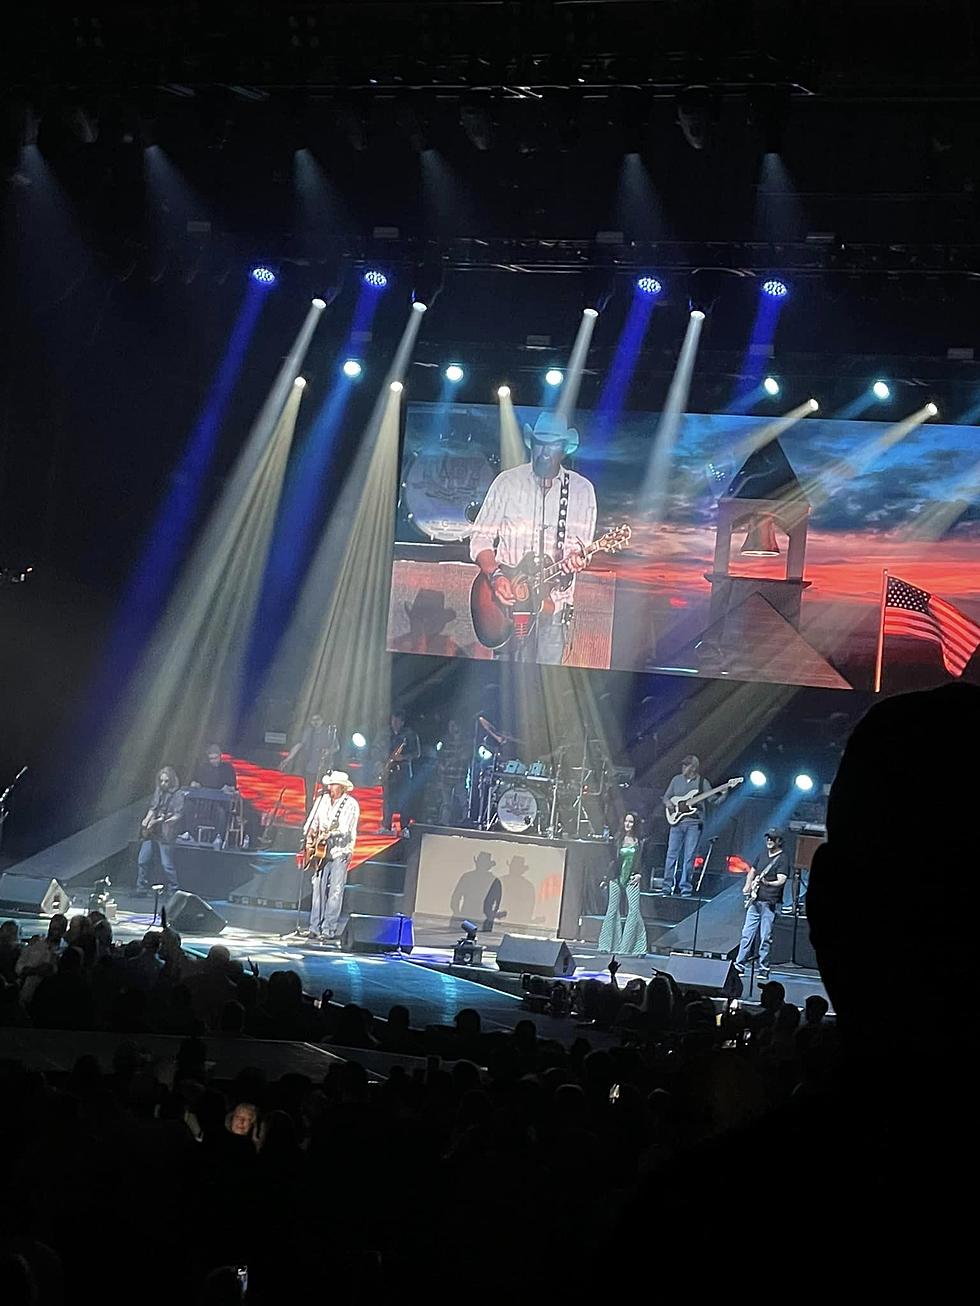 A Look At Toby Keith’s Last Concert At Bismarck Event Center